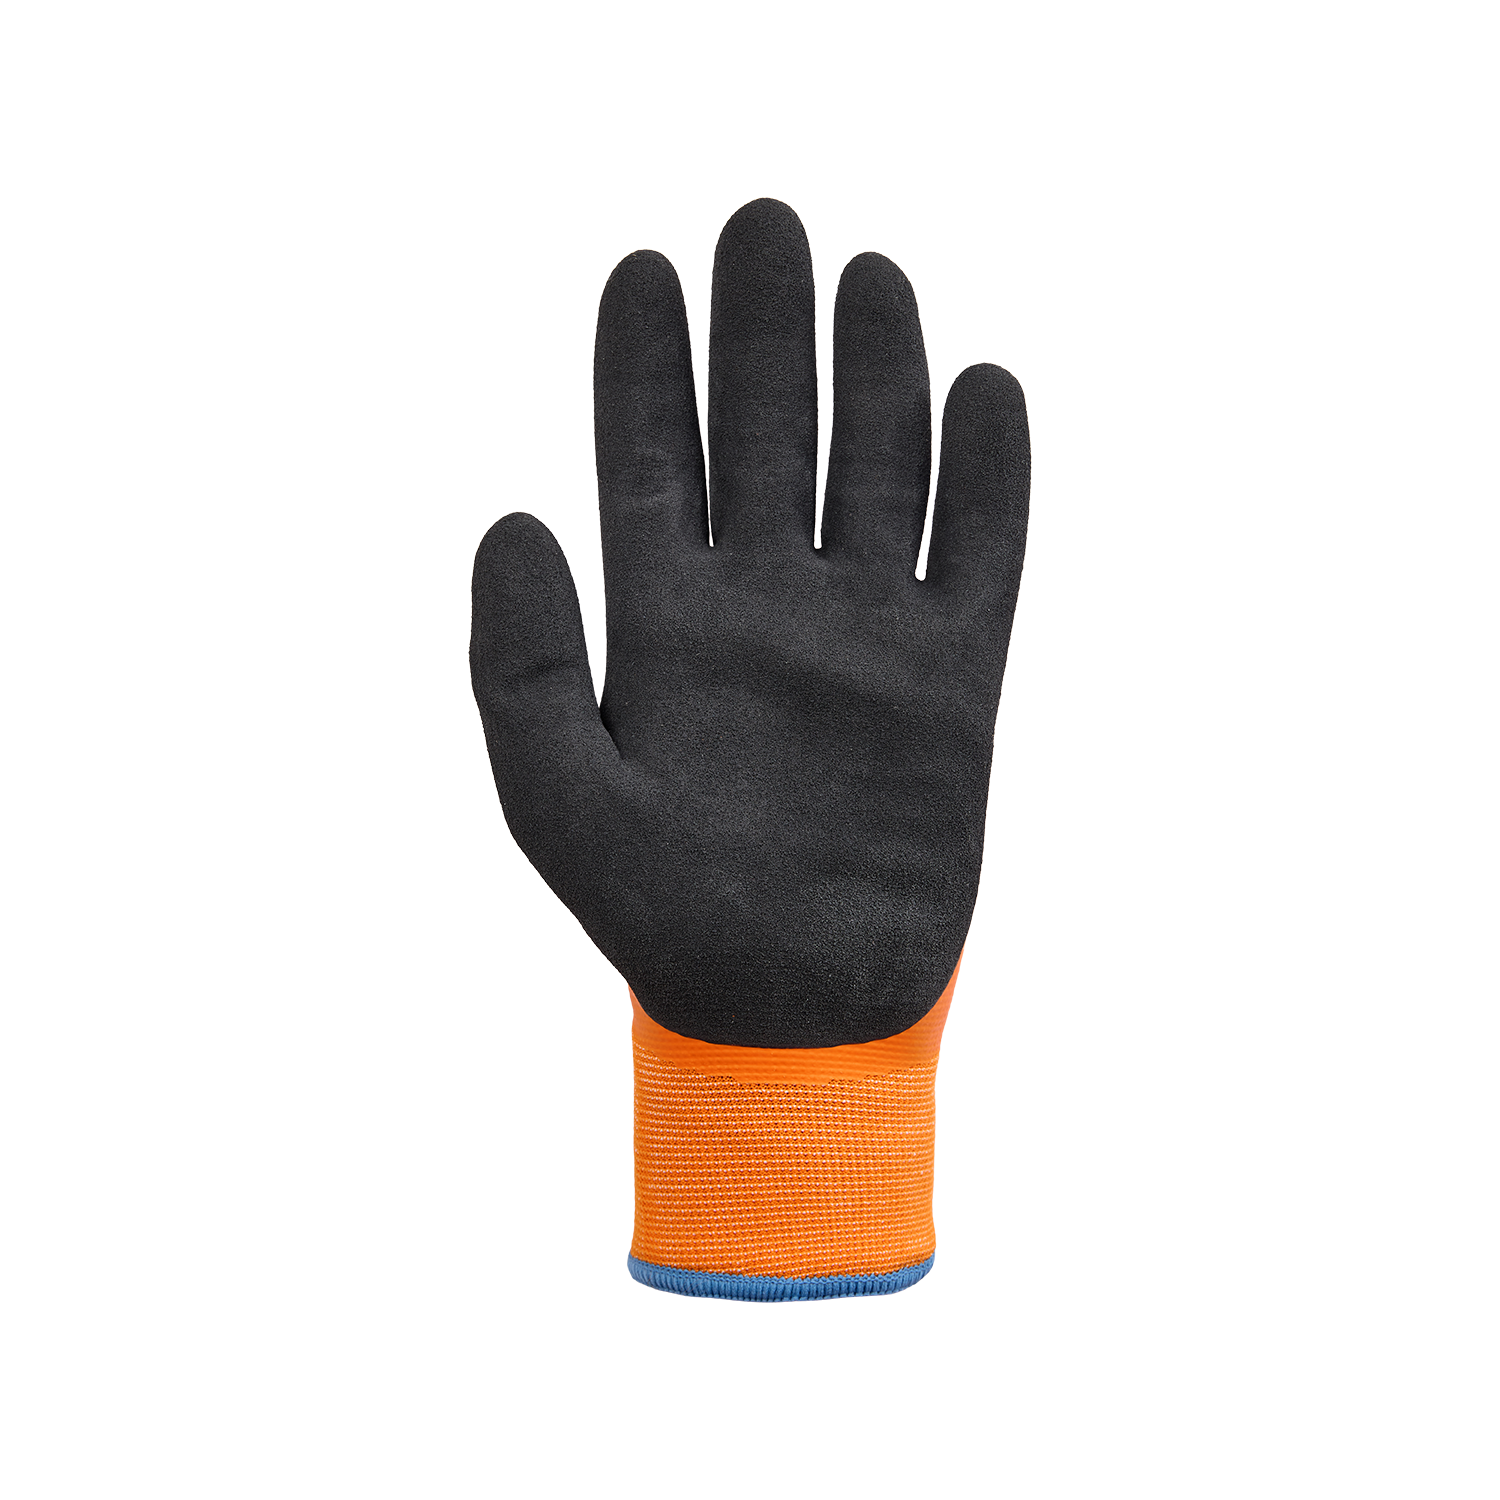 NORSE Arctic waterproof winter assembly gloves size 10